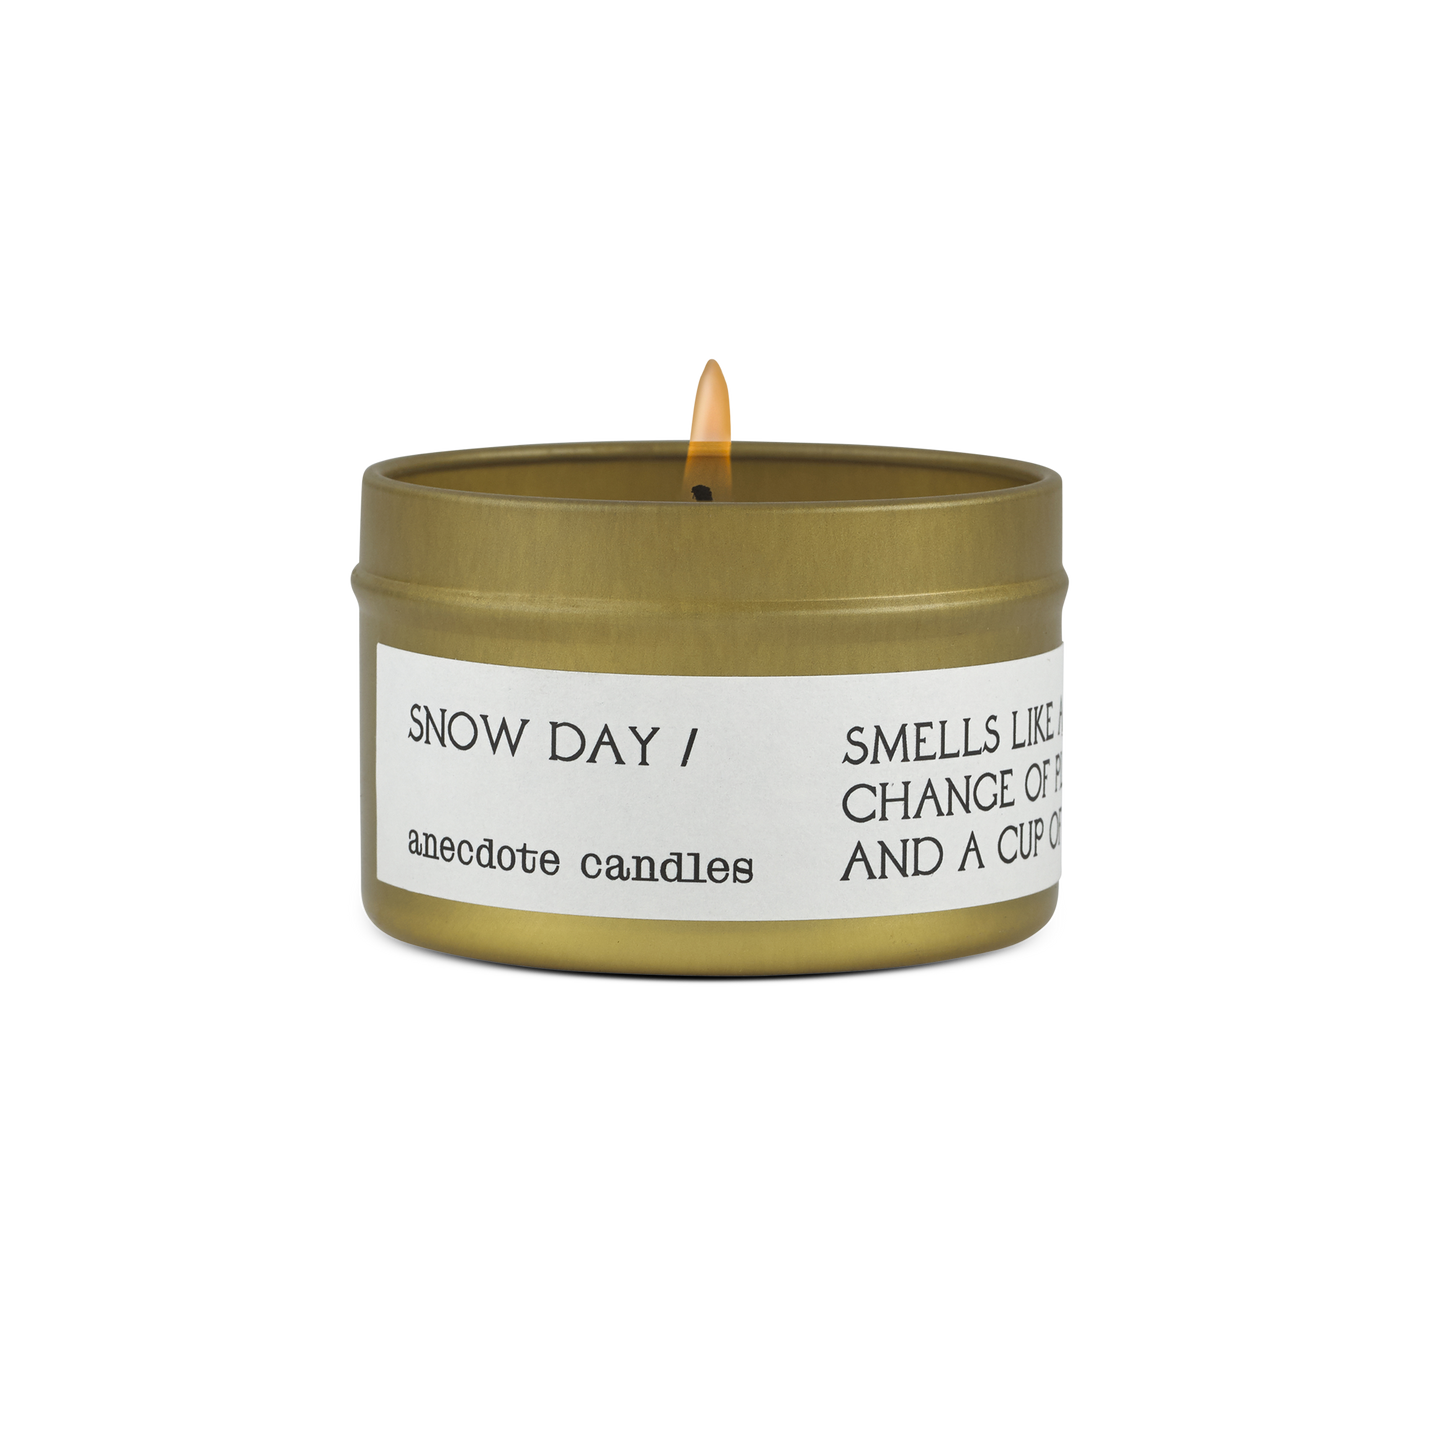 Anecdote Candles - Snow Day Gold Travel Tin Candle (Limited Edition)